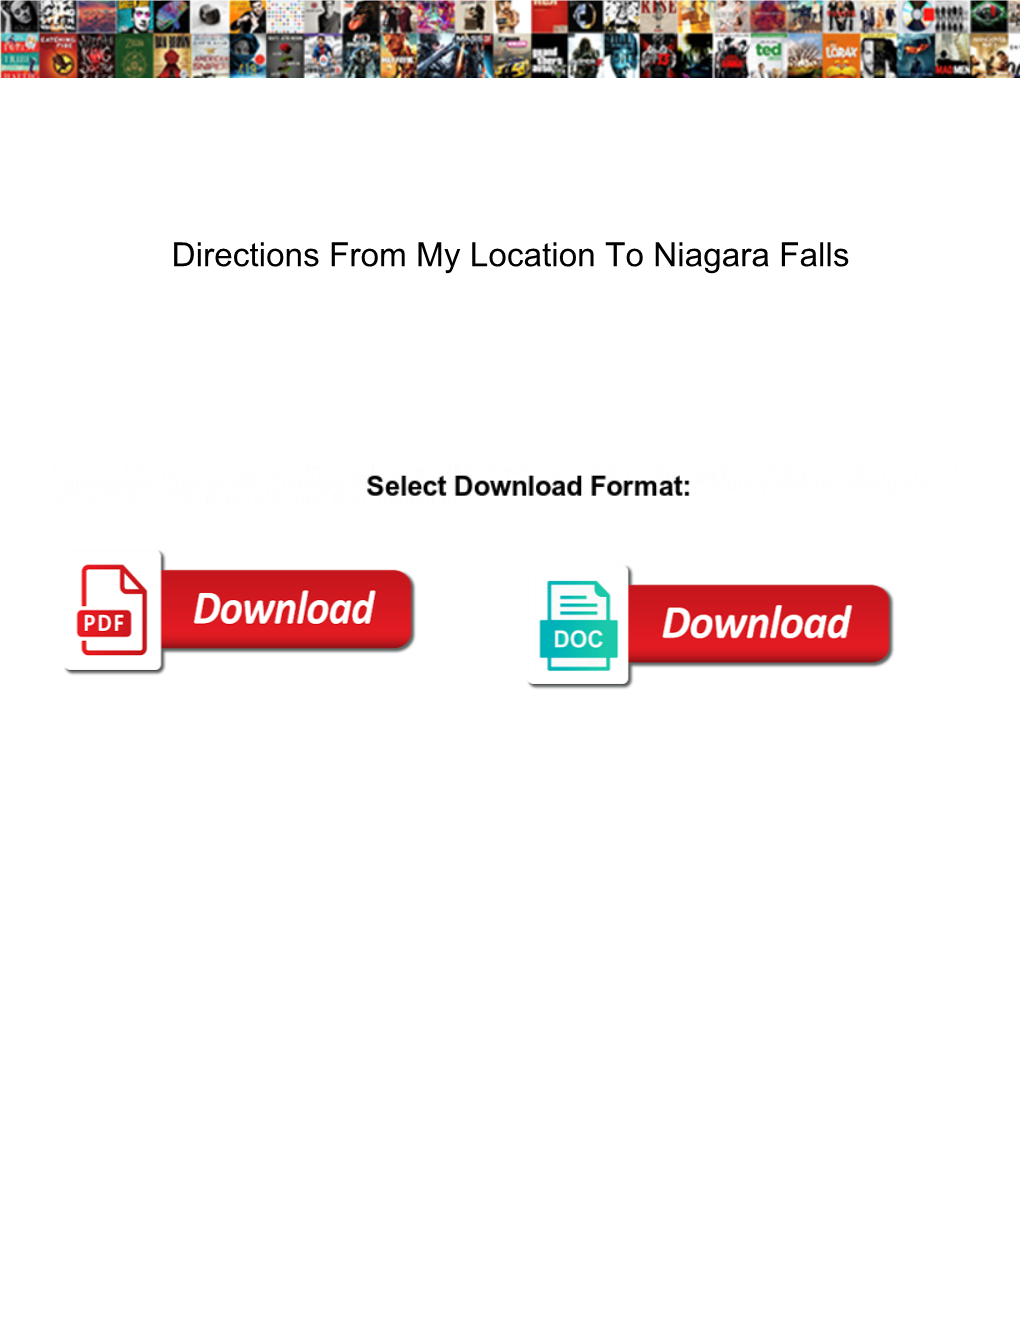 Directions from My Location to Niagara Falls